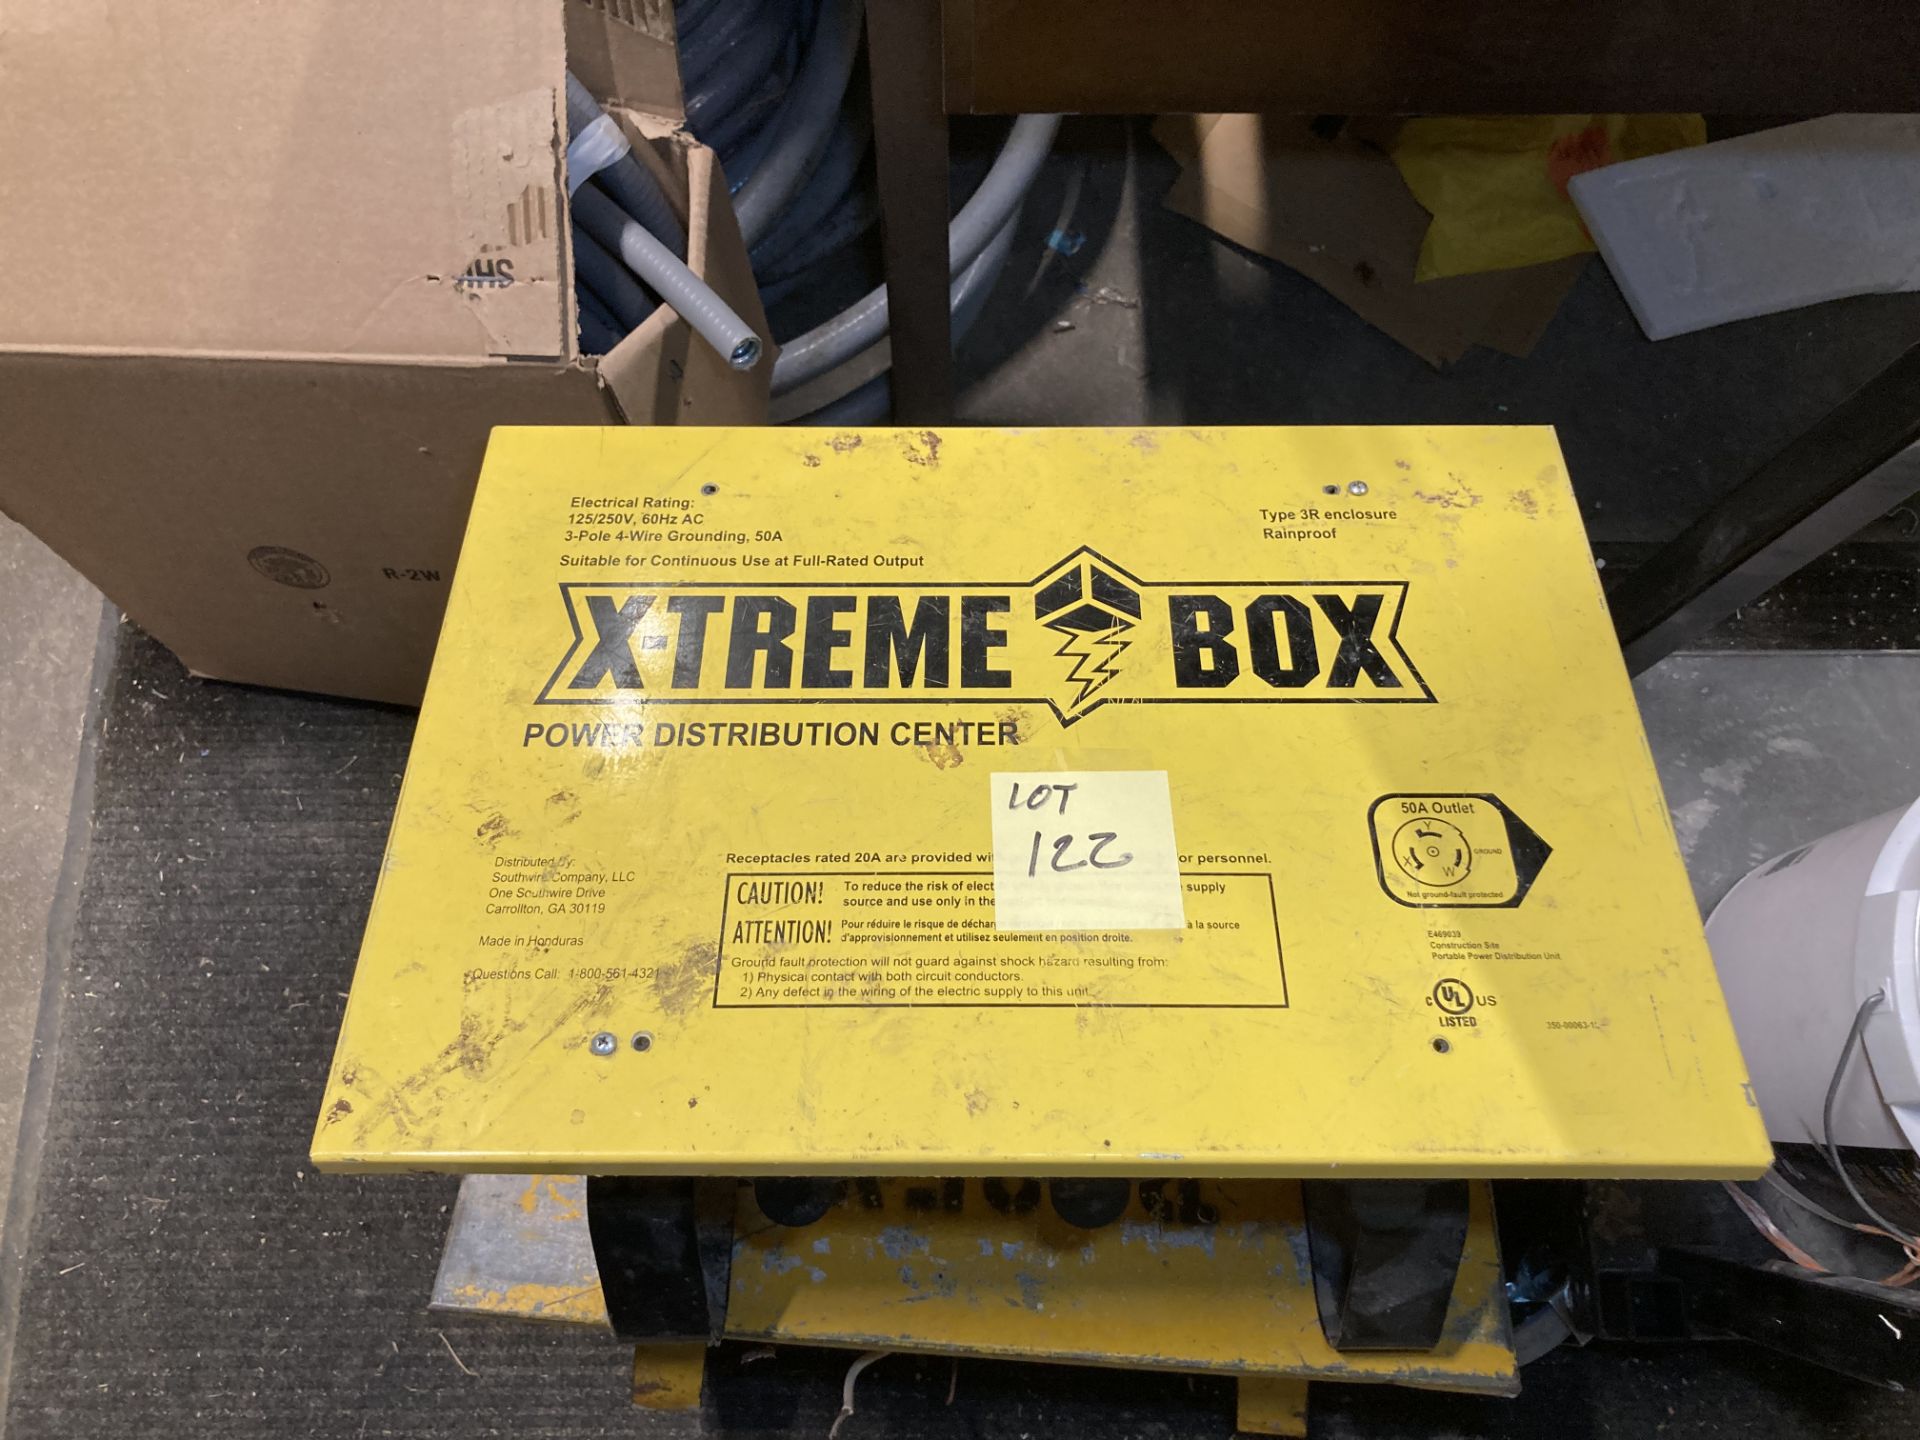 LOT OF: (2) X-TREME BOX Power distribution center systems